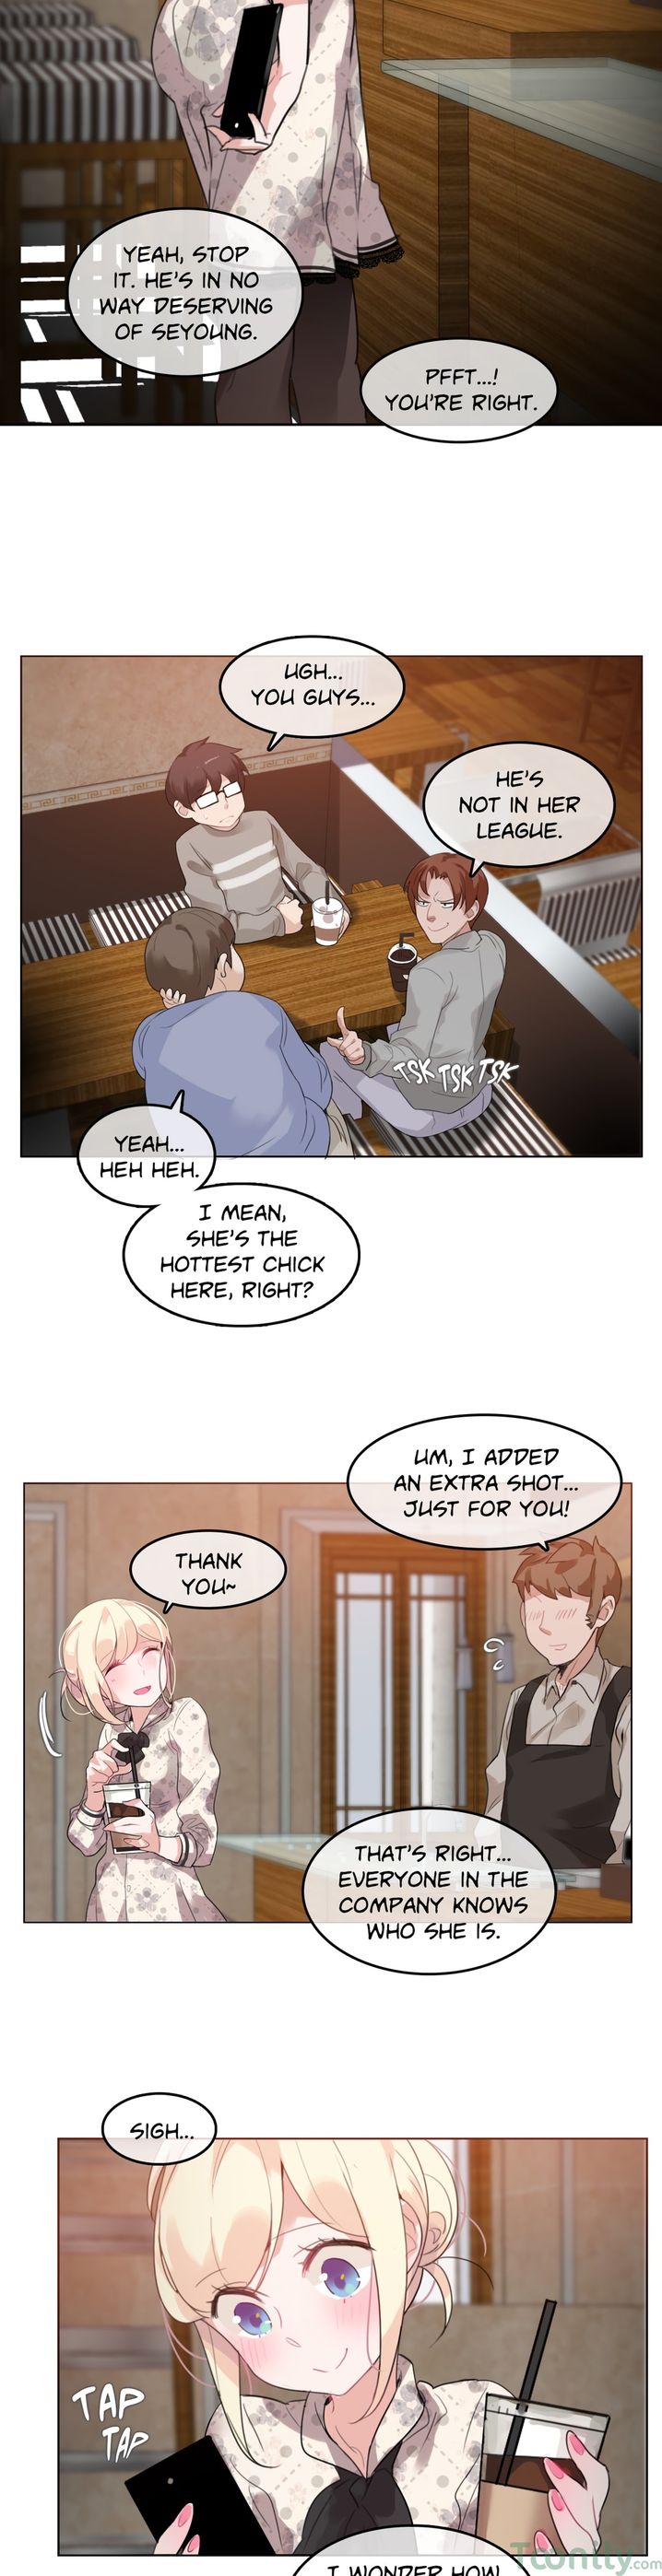 A Pervert’s Daily Life - Chapter 28 Page 2